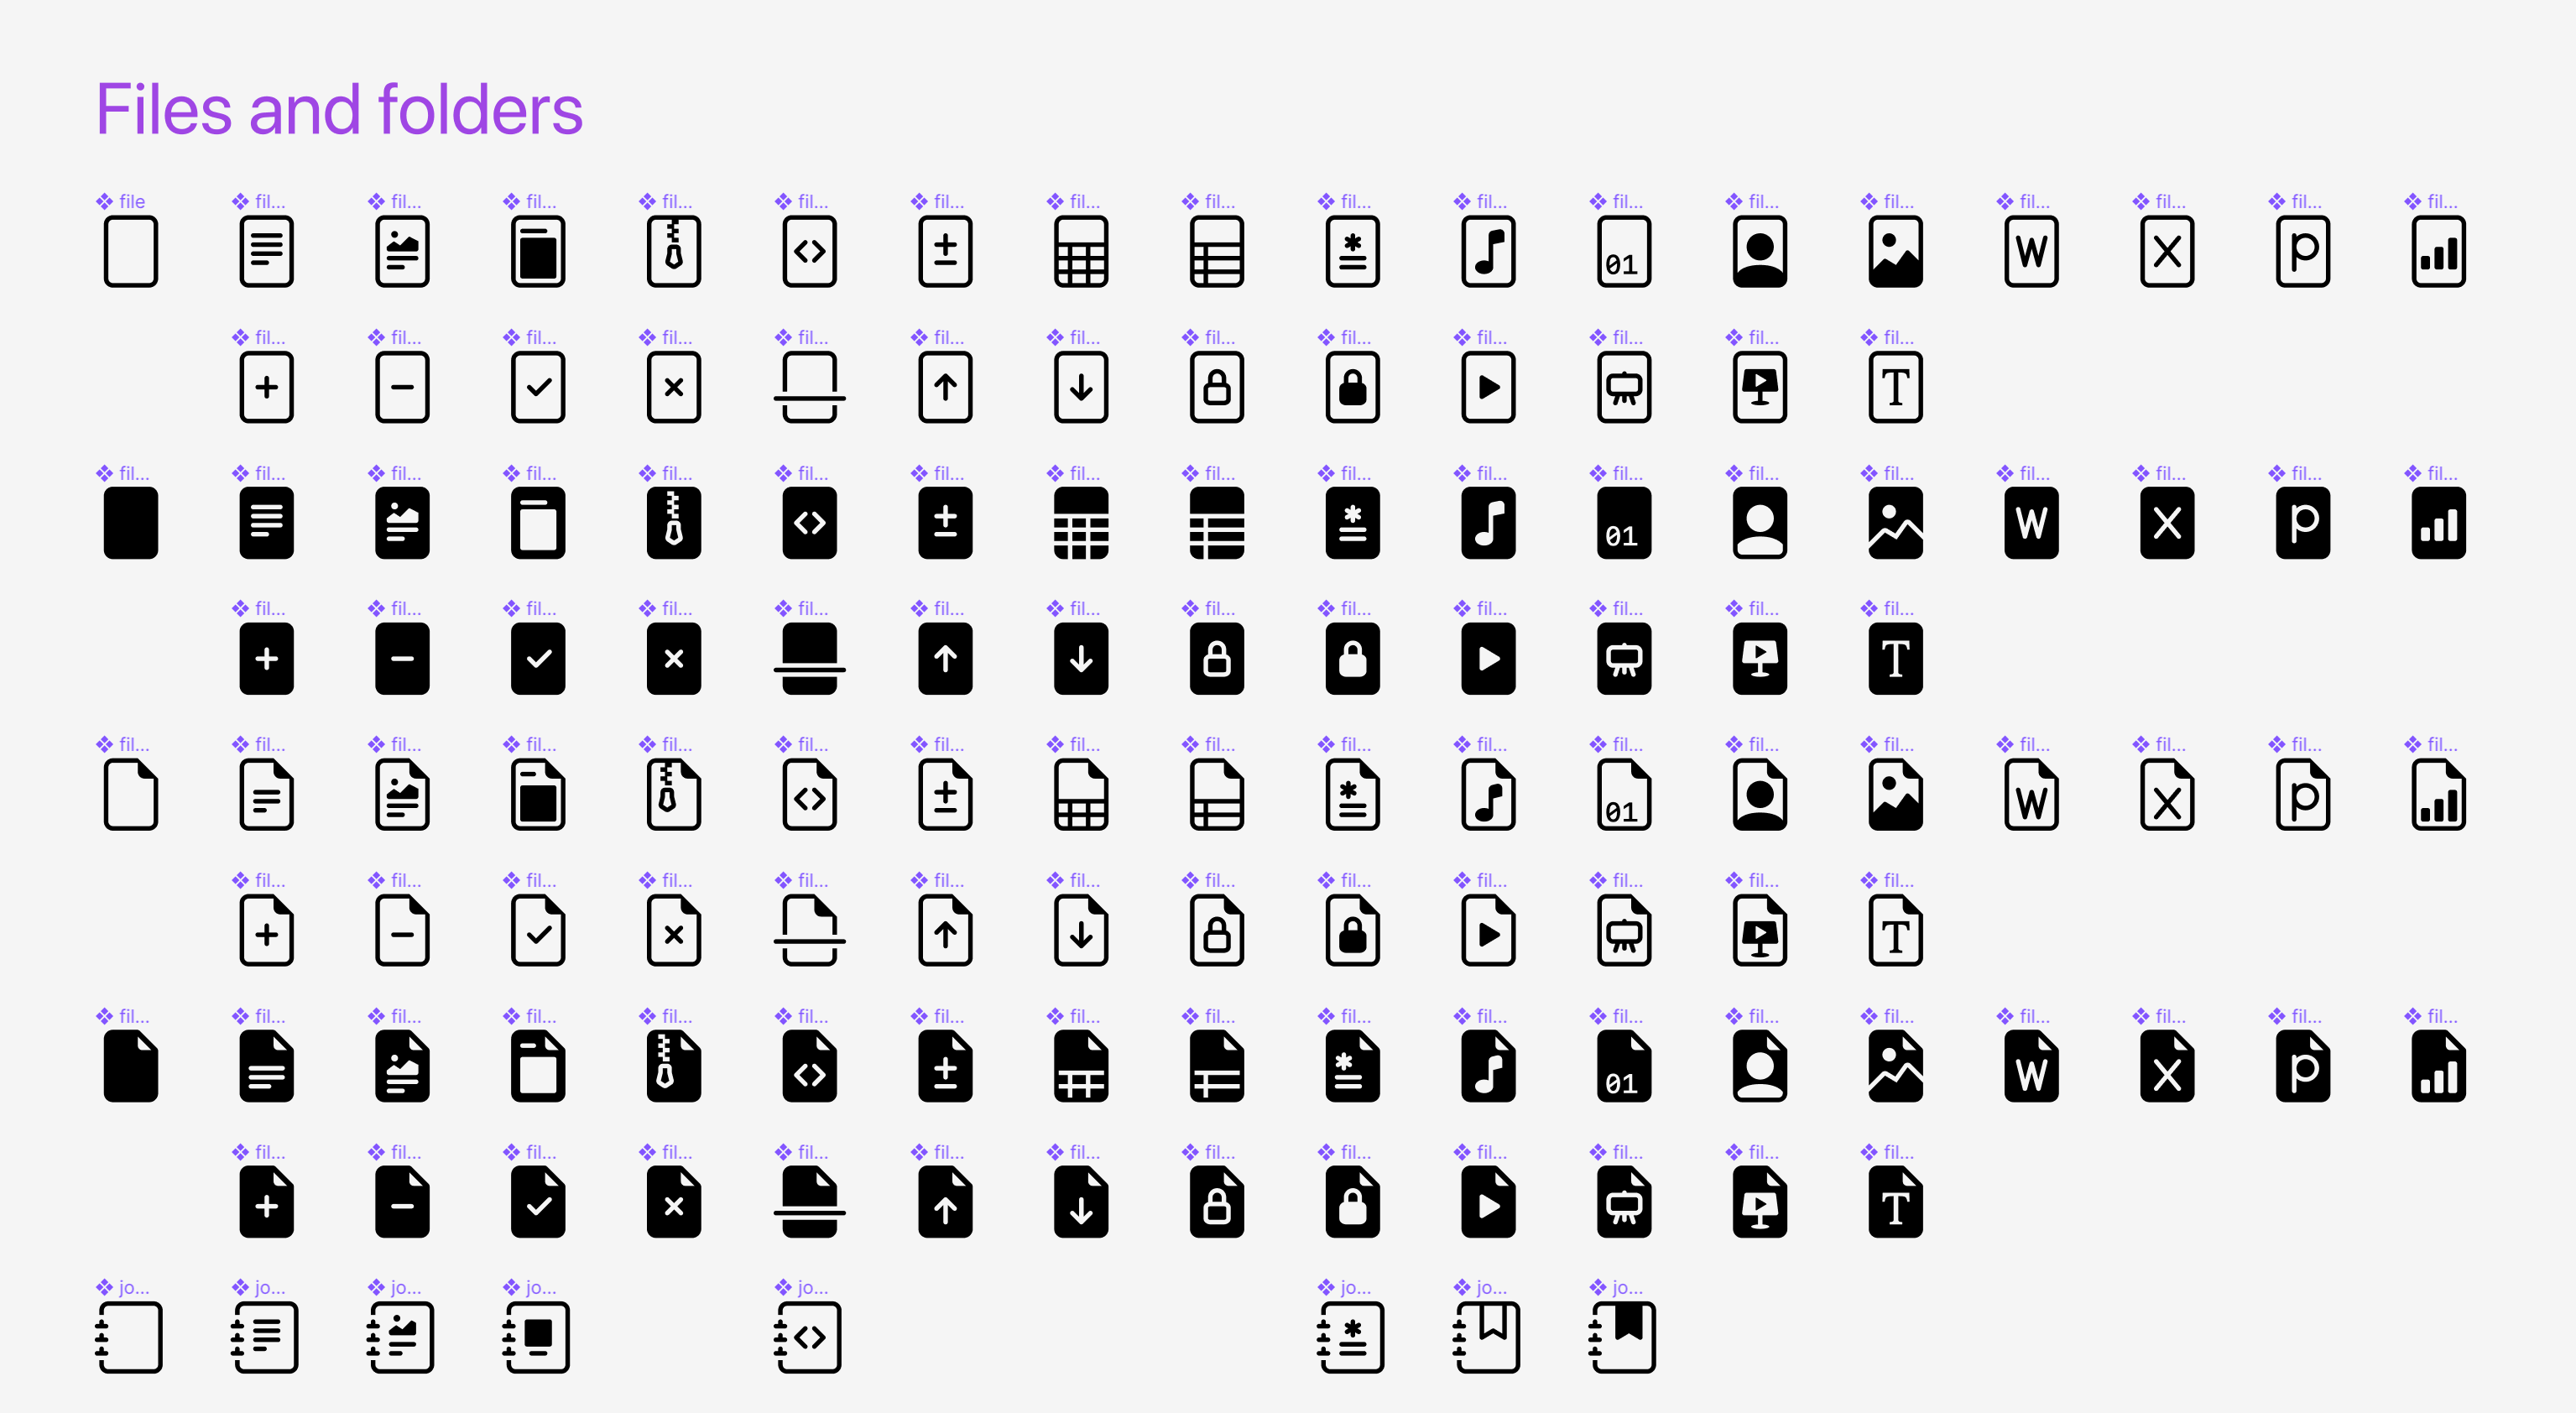 File and folder icons